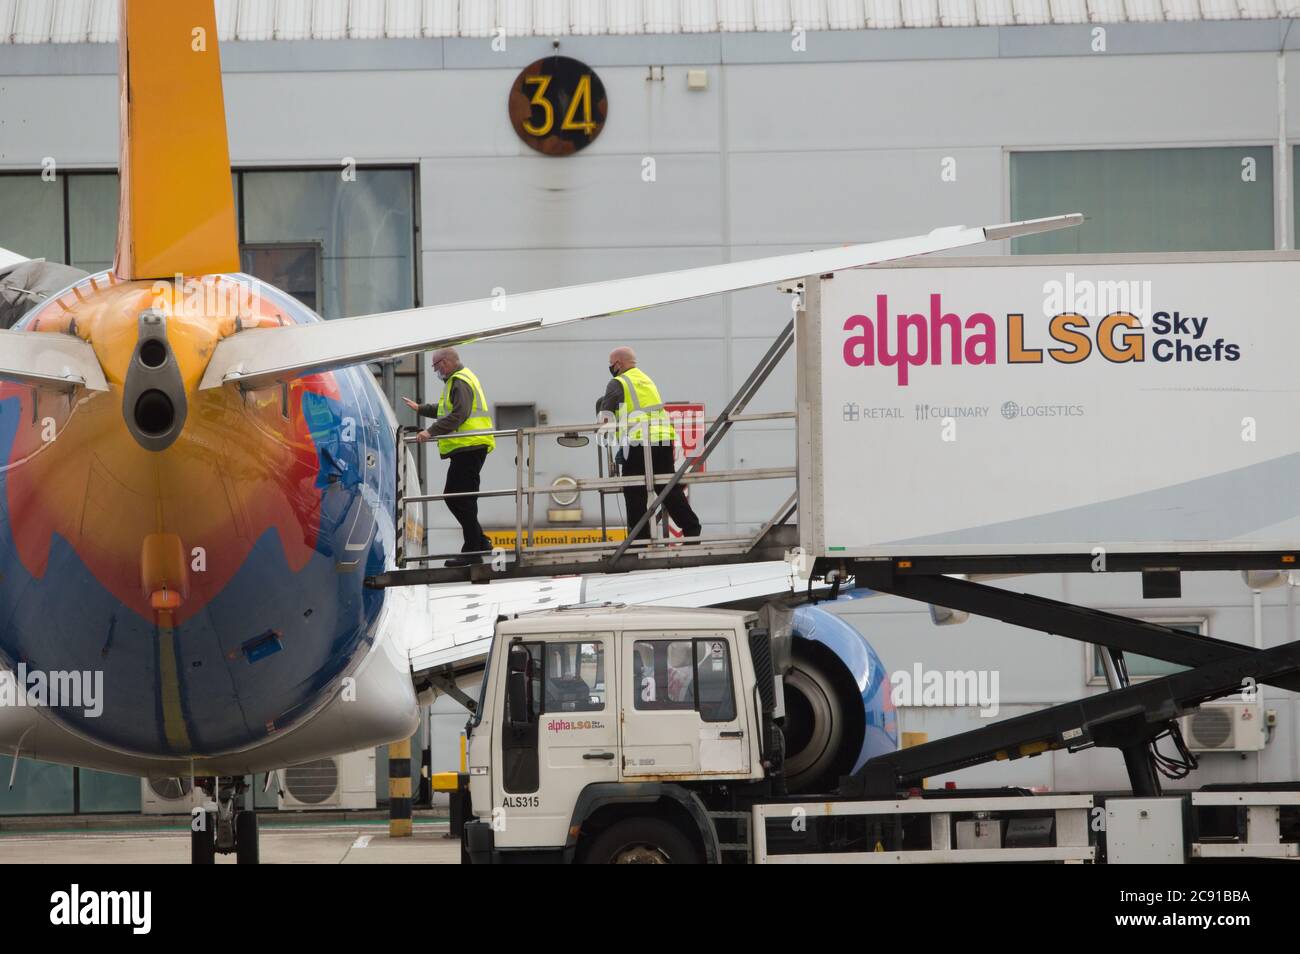 Glasgow, Scotland, UK. 28th July, 2020. Pictured: Airport ground crews from LSG Sky Chefs load catering services of food and drink trolleys onto a Jet2 Boeing 737-86N (Reg: G-DRTB) destined for Dalaman, Turkey. Today, Jet2 Holidays cancels all flights to Tenerife, Fuerteventura, Gran Canaria, Lanzarote, Majorca, Menorca and Ibiza after Foreign Office advised against non-essential travel to the islands. Credit: Colin Fisher/Alamy Live News Stock Photo